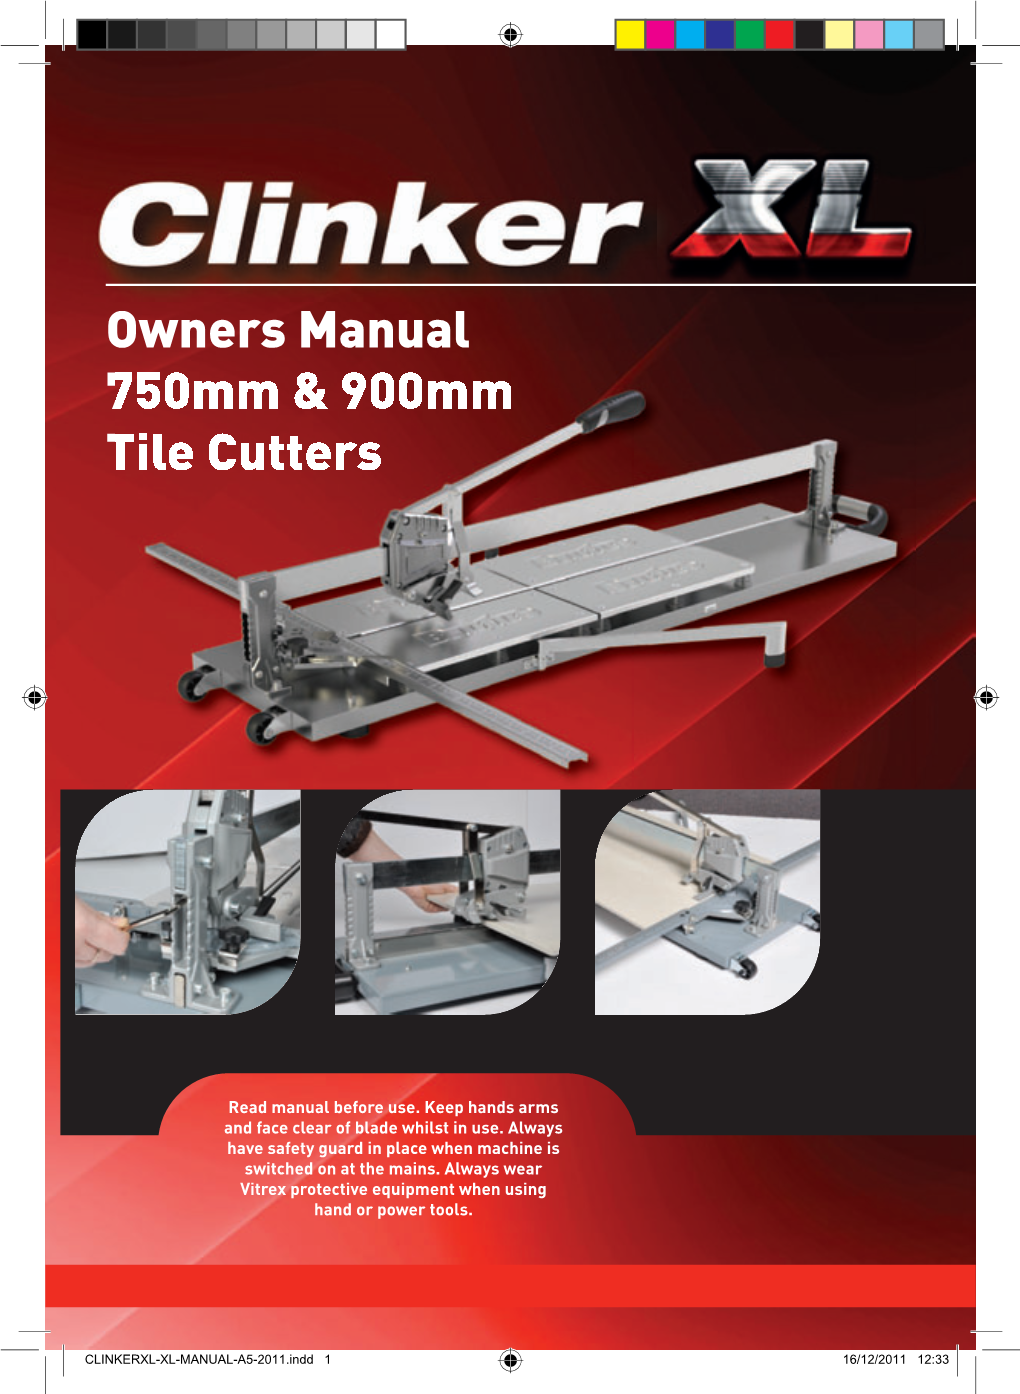 Owners Manual 750Mm & 900Mm Tile Cutters